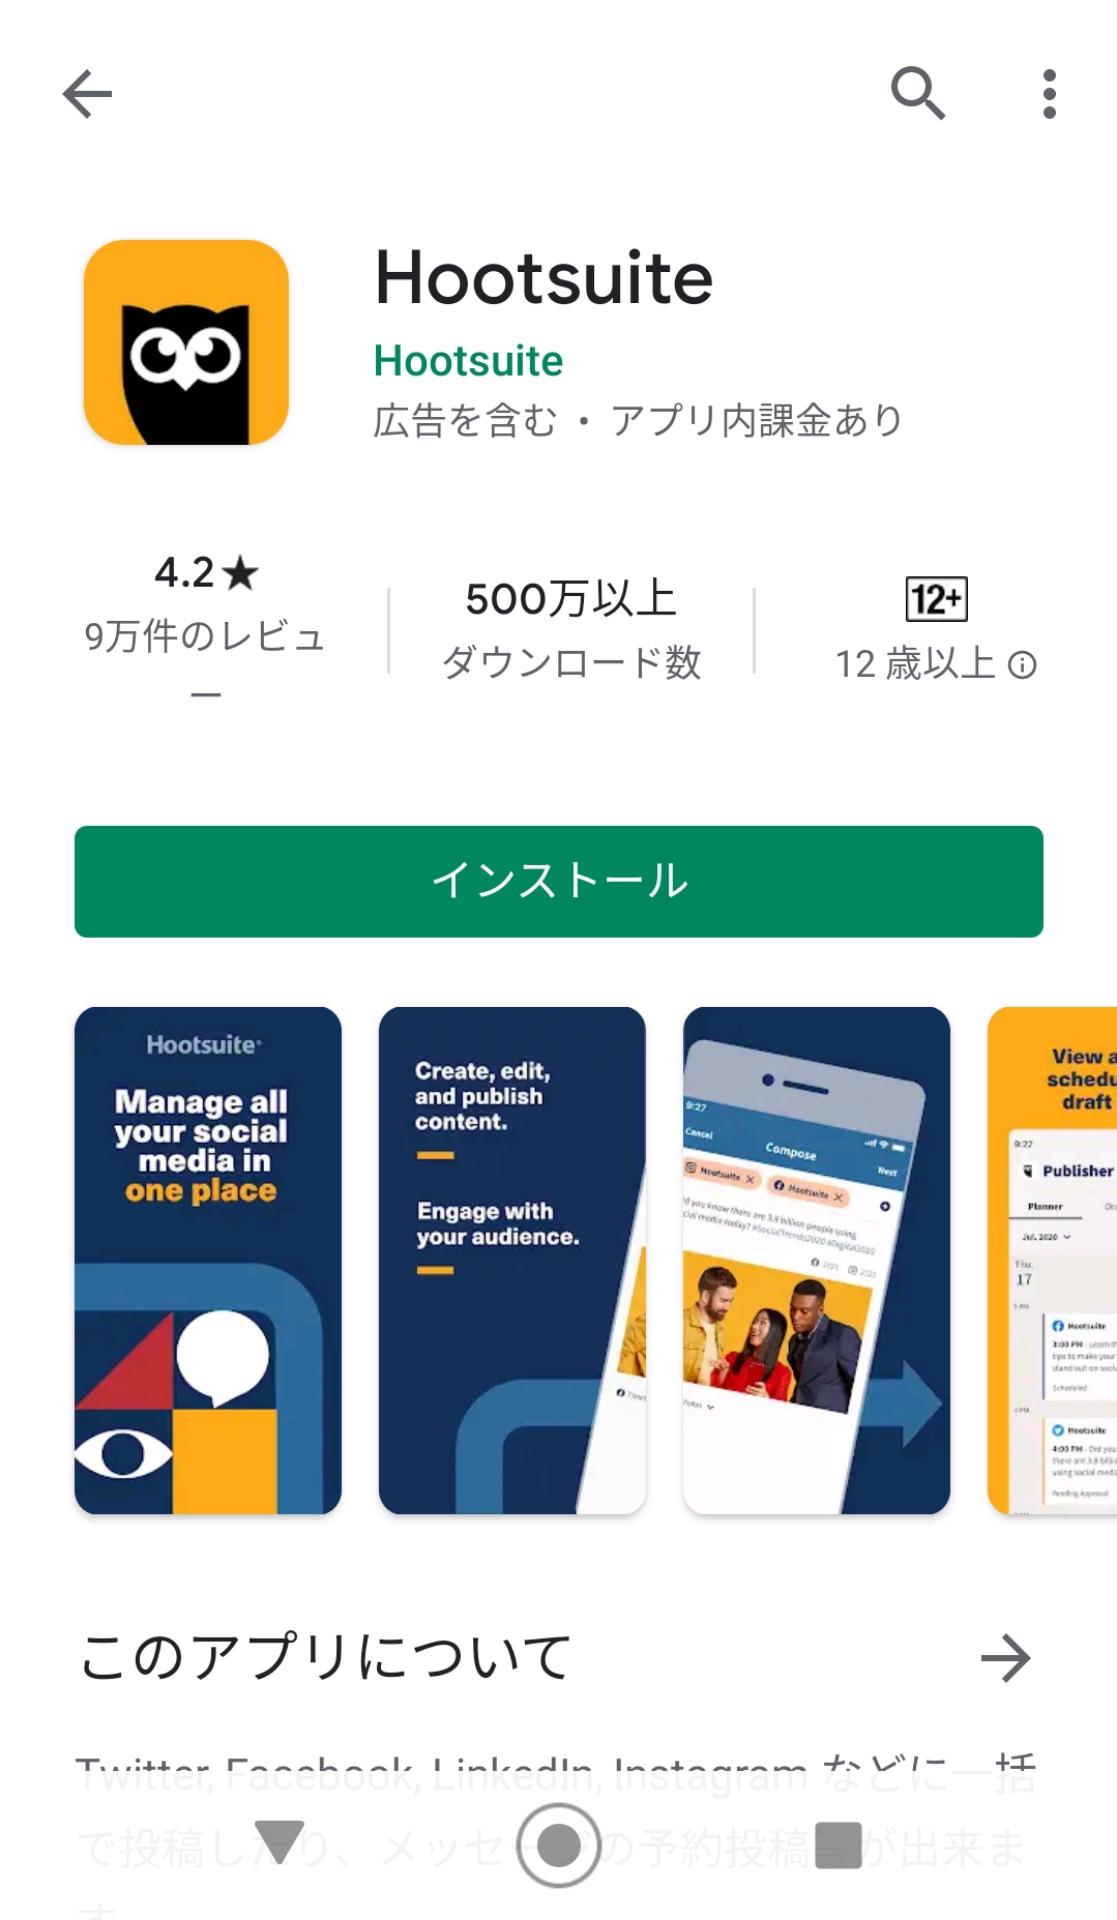 Hootsuite　Google Play インストール　Android